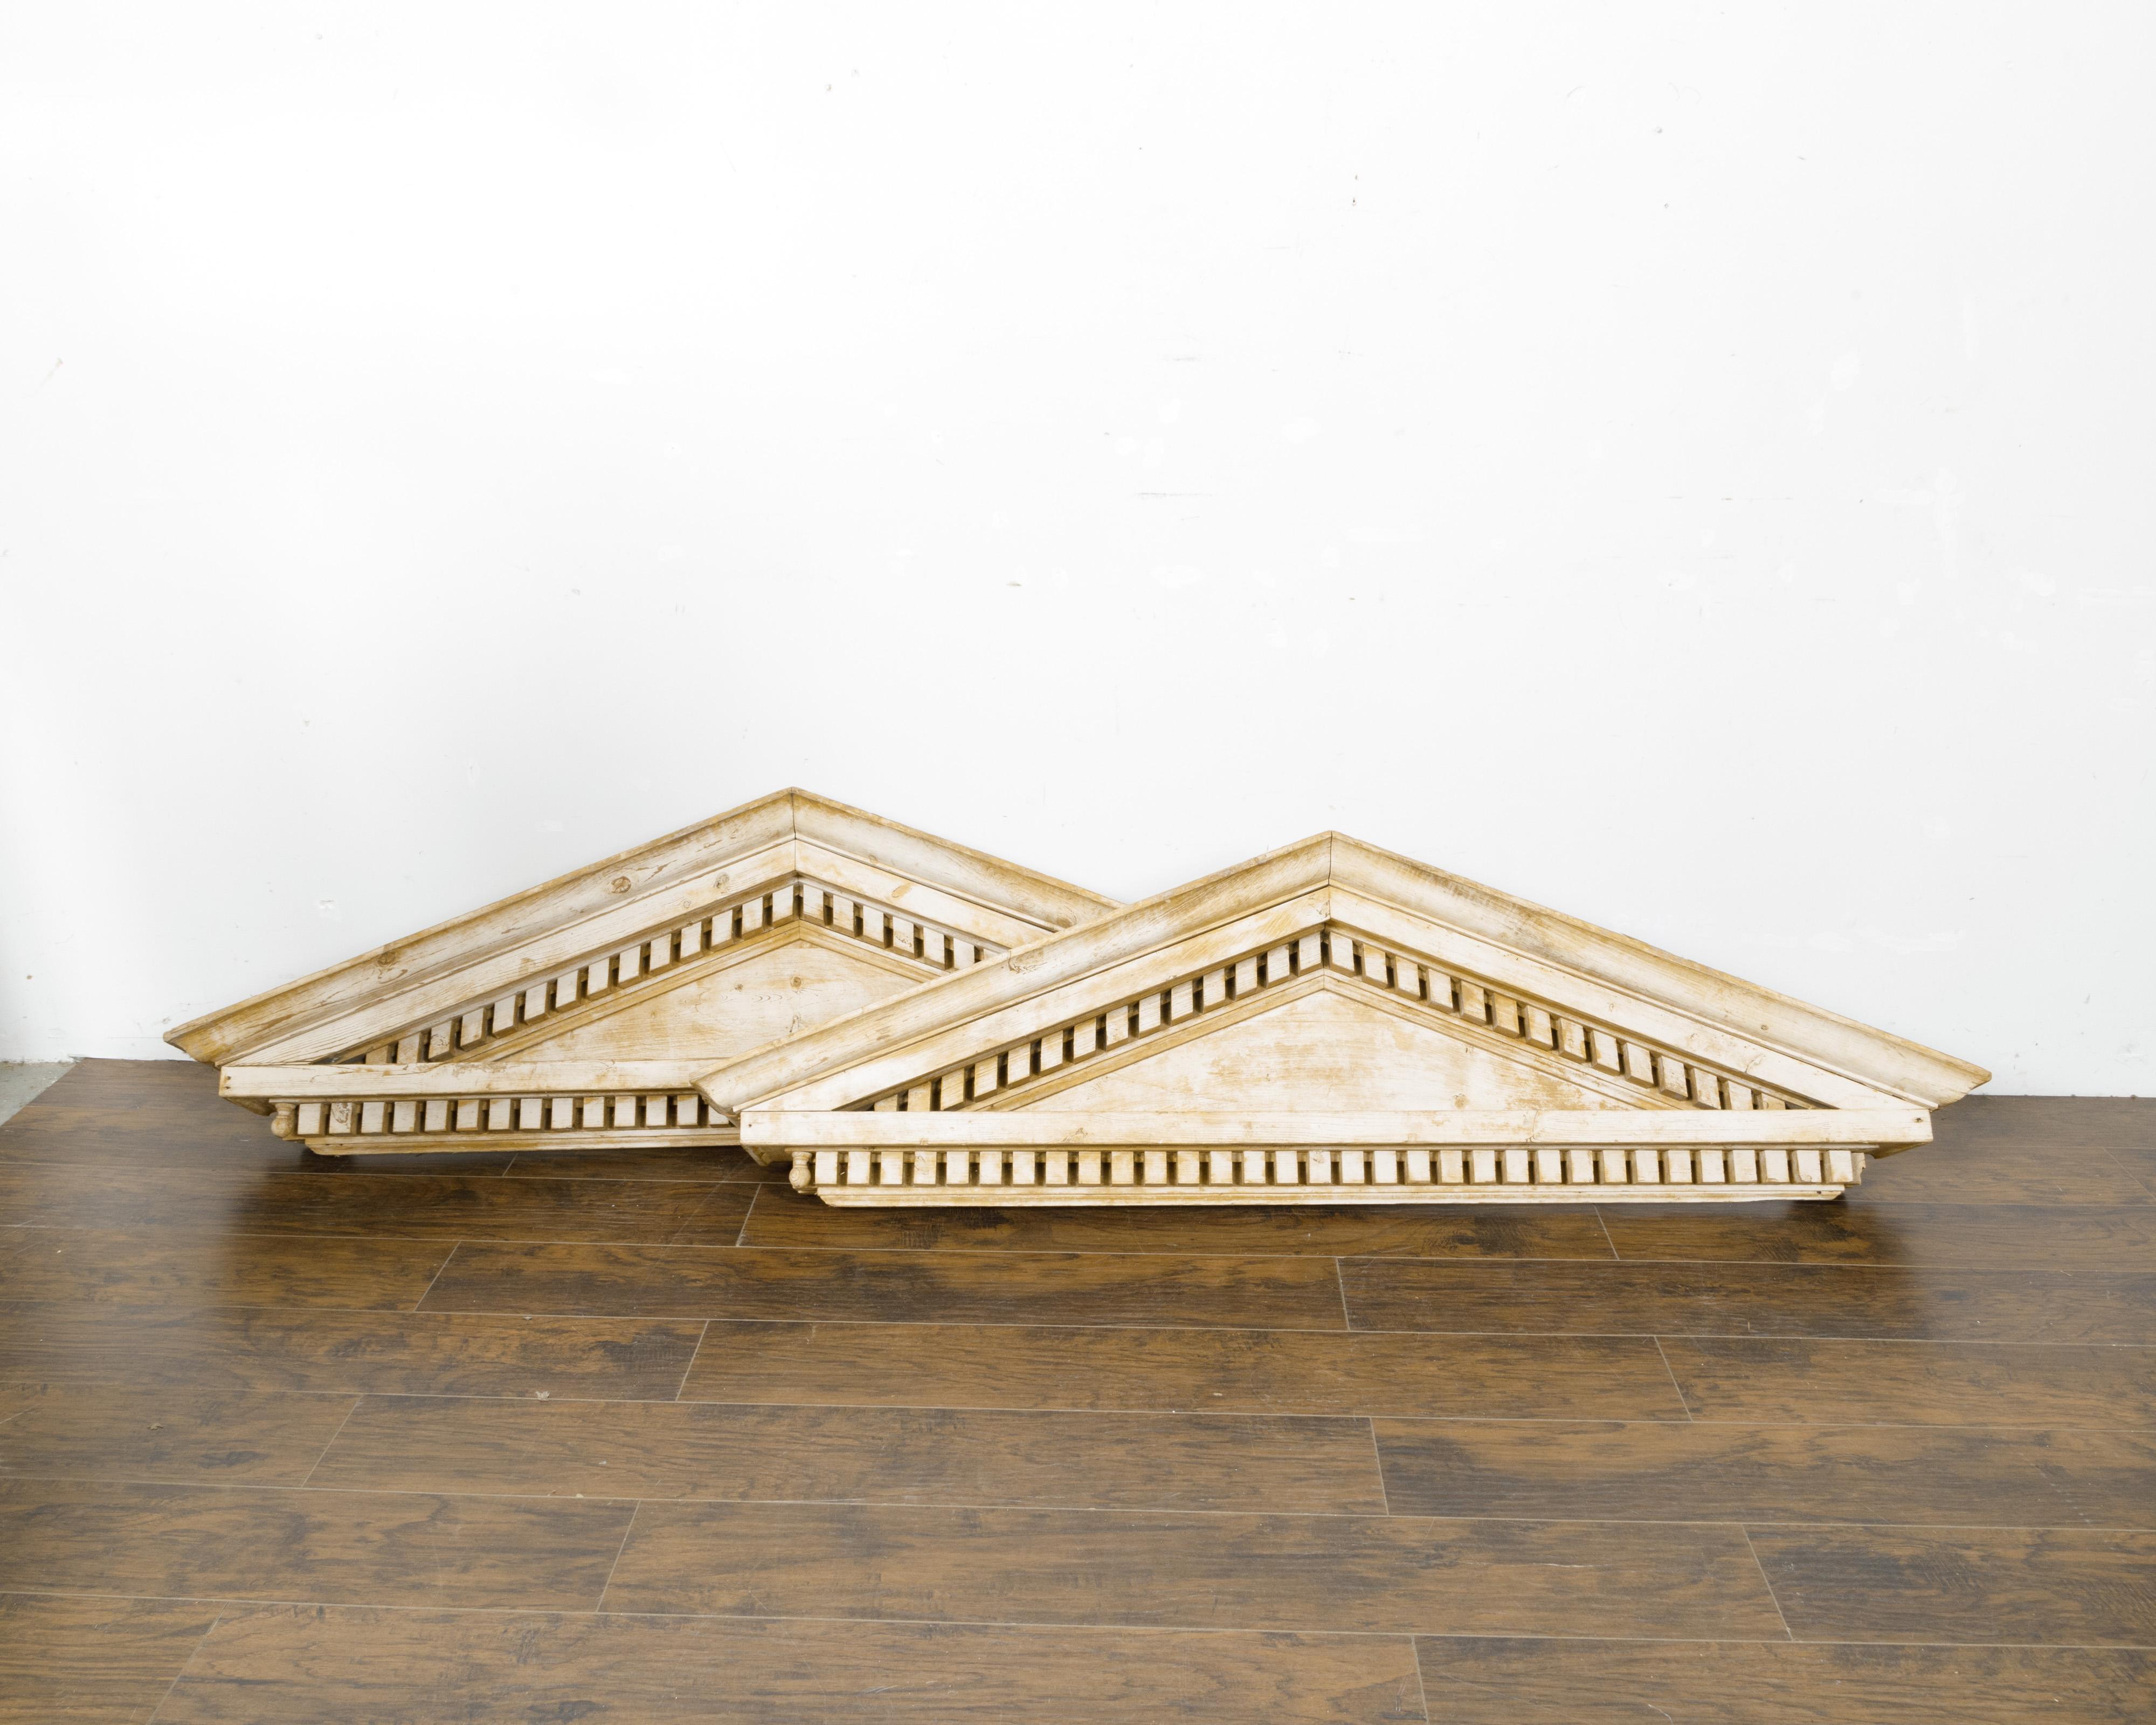 A pair of oversized English pine triangular pediments from the 19th century with carved dentil molding. This pair of oversized English pine triangular pediments from the 19th century is a testament to the timeless elegance of classic architectural